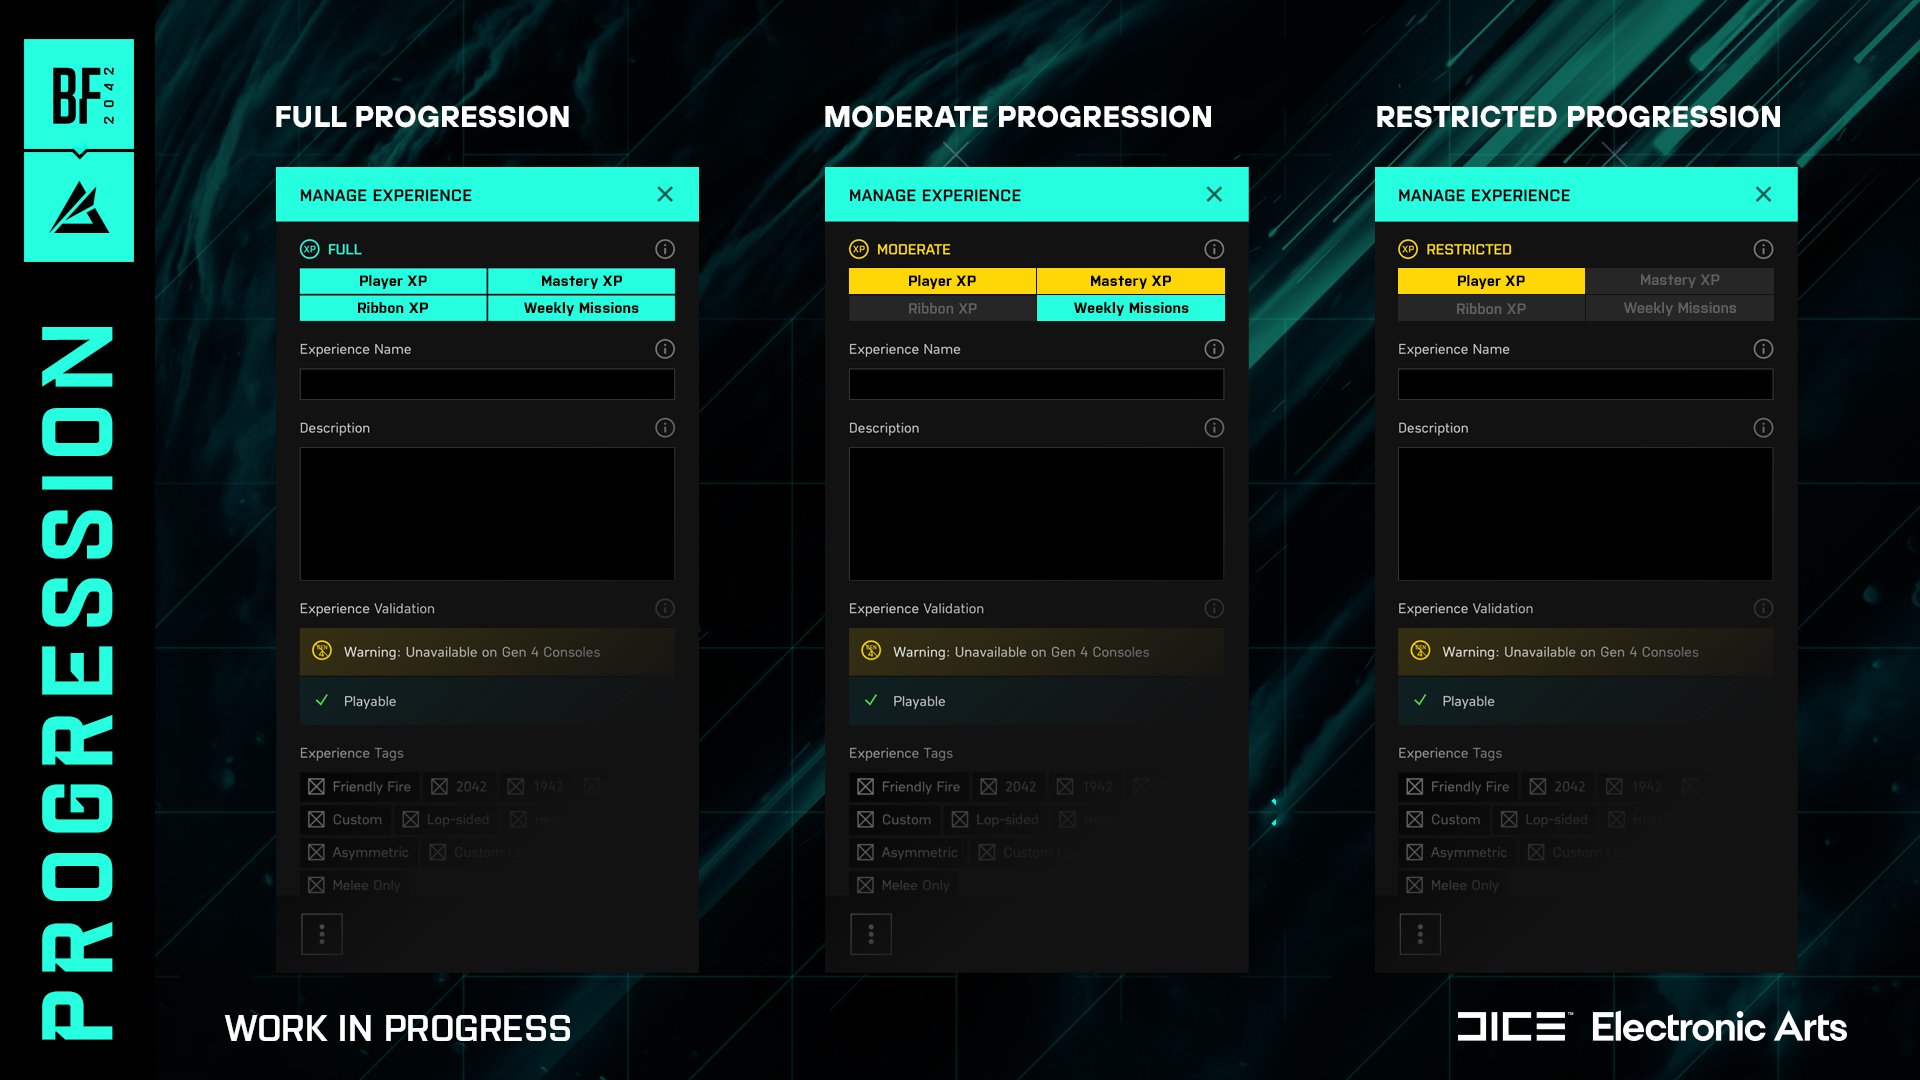 Image displays three columns, each showcasing different settings that would highlight if Full, Moderate or Restricted progression applies to the current Custom Experience in the Battlefield Portal Web Builder.